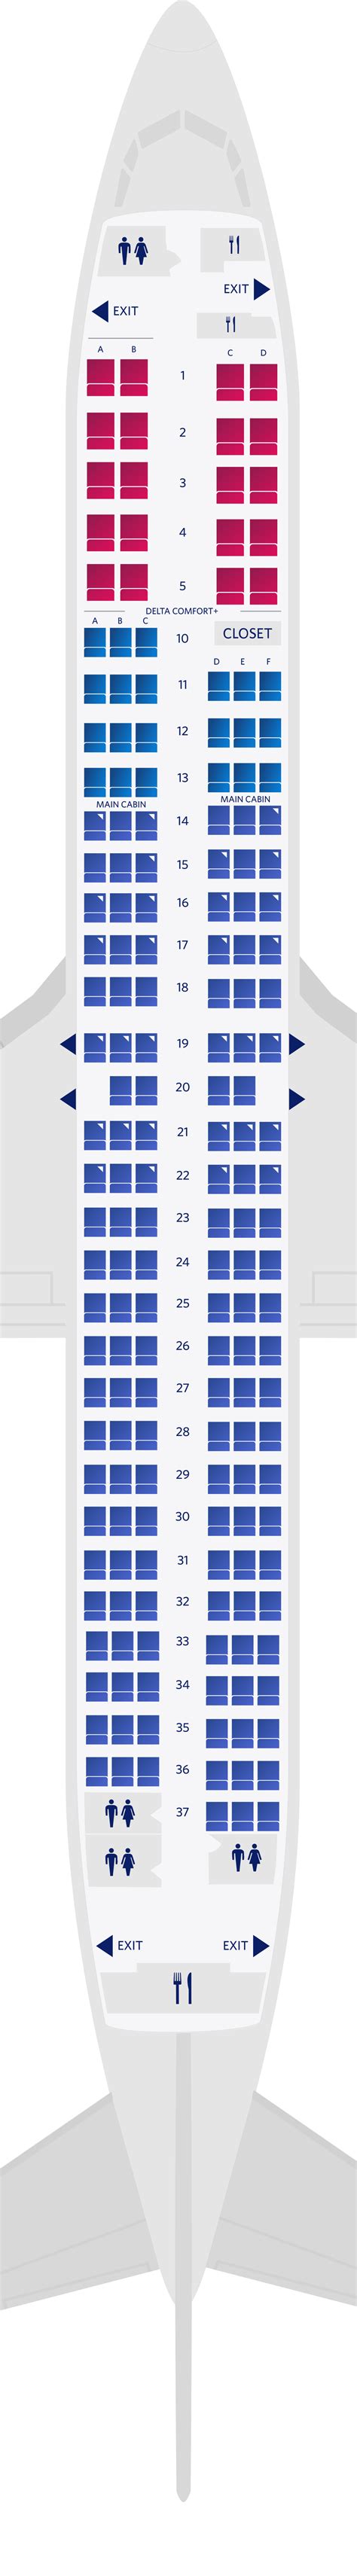 United 737-900 seat map. United Airlines - Airline Tickets, Travel Deals and Flights If you're seeing this message, that means JavaScript has been disabled on your browser, please enable JS ... 